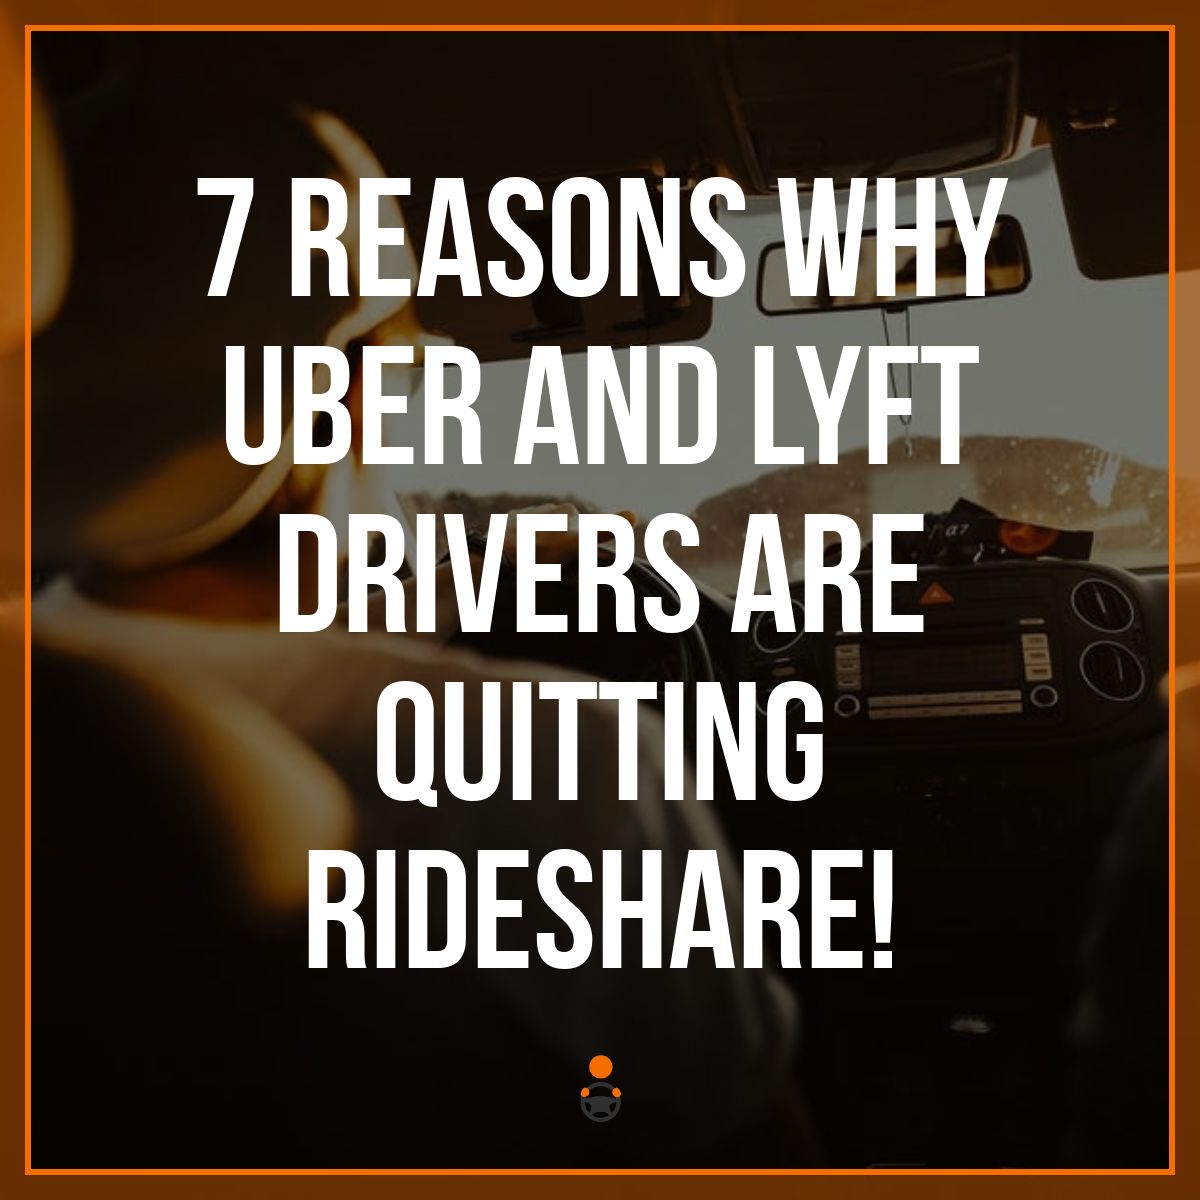 7 Reasons Why Uber and Lyft Drivers Are Quitting Rideshare!